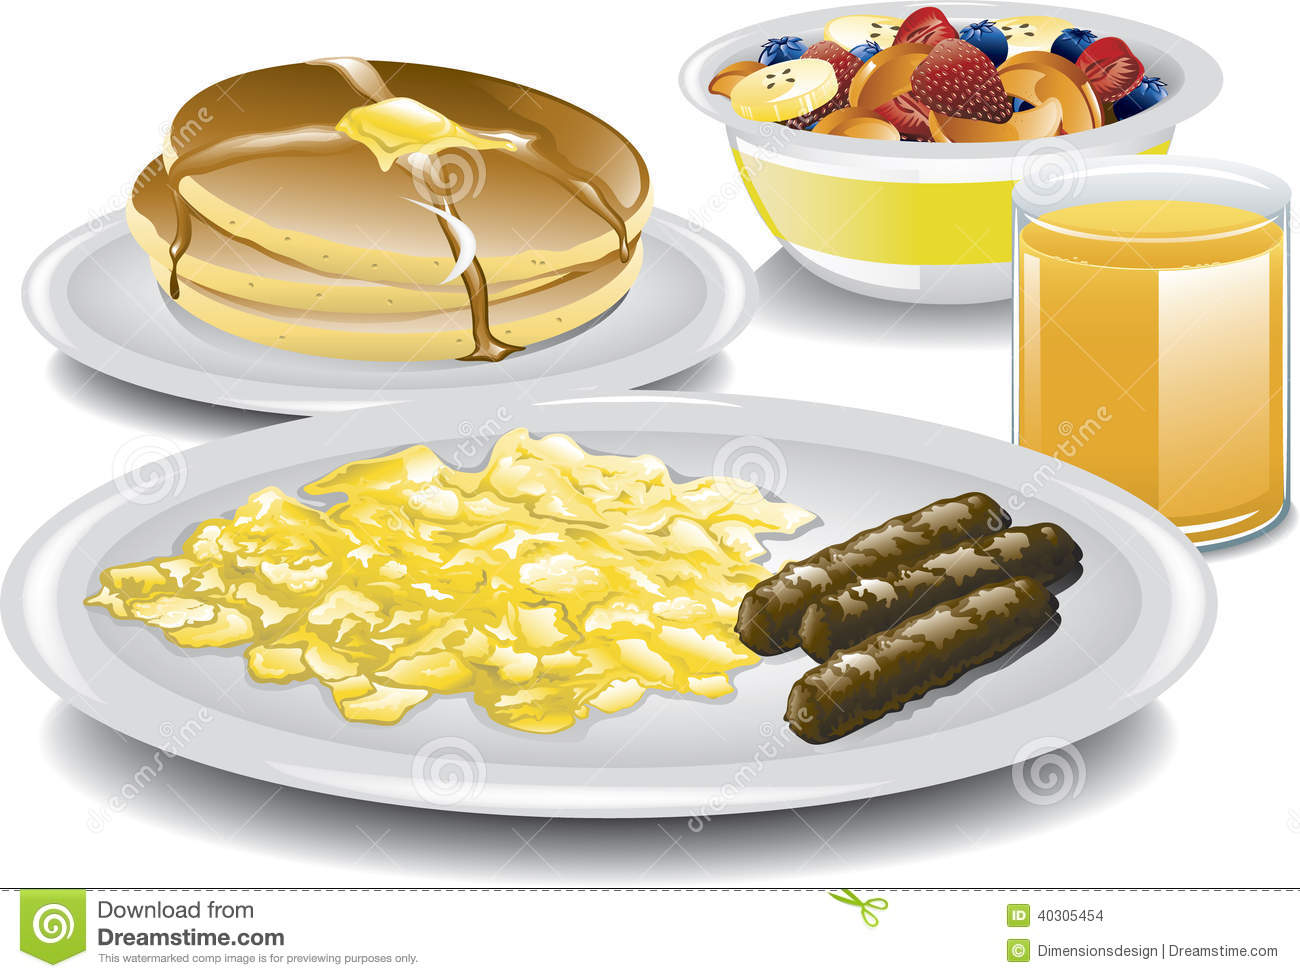 Illustration Of A Complete Breakfast With Scrambled Eggs Sausage